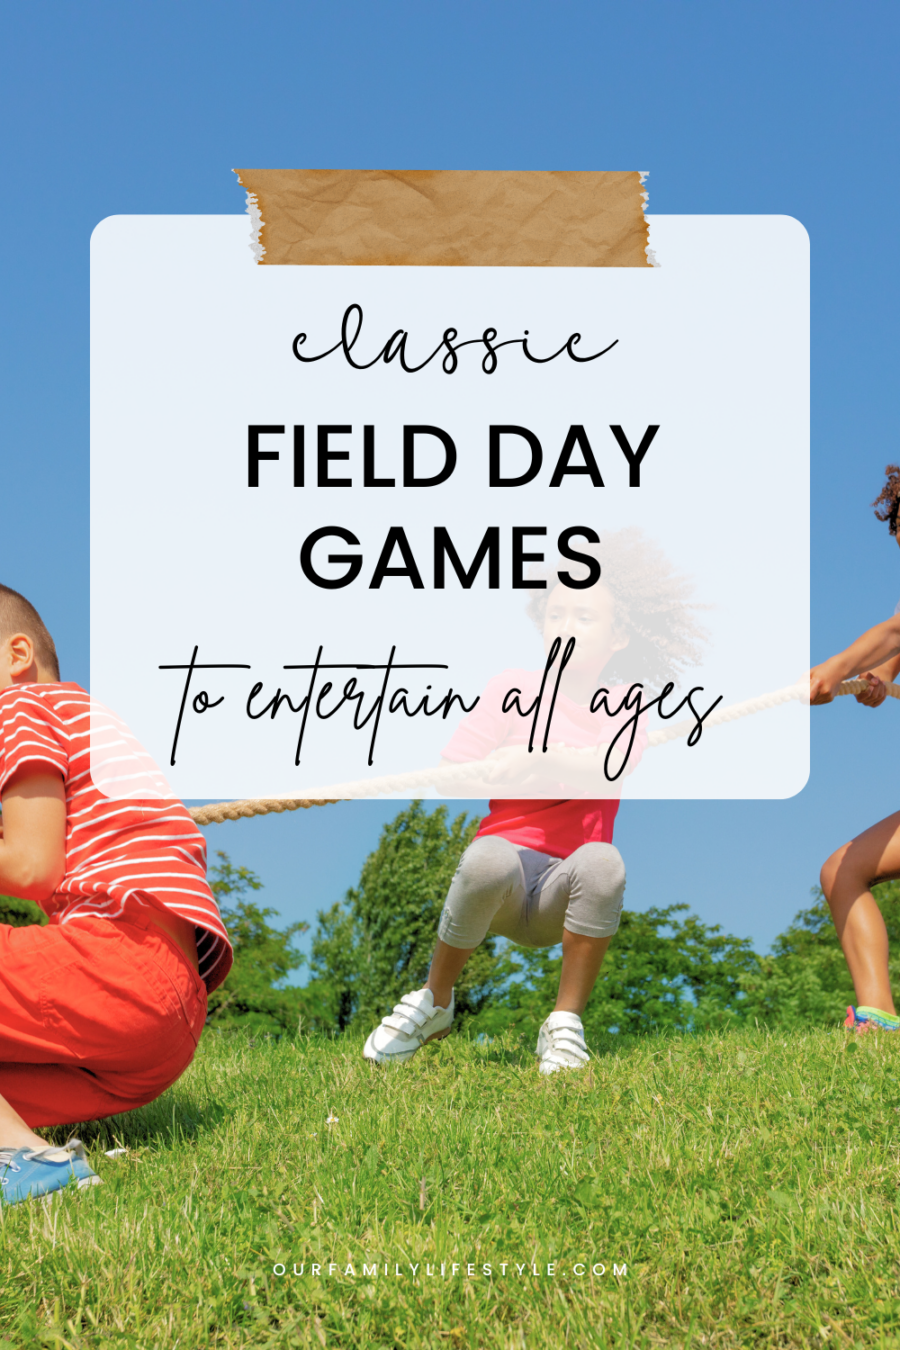 Classic Field Day Games to Entertain All Ages